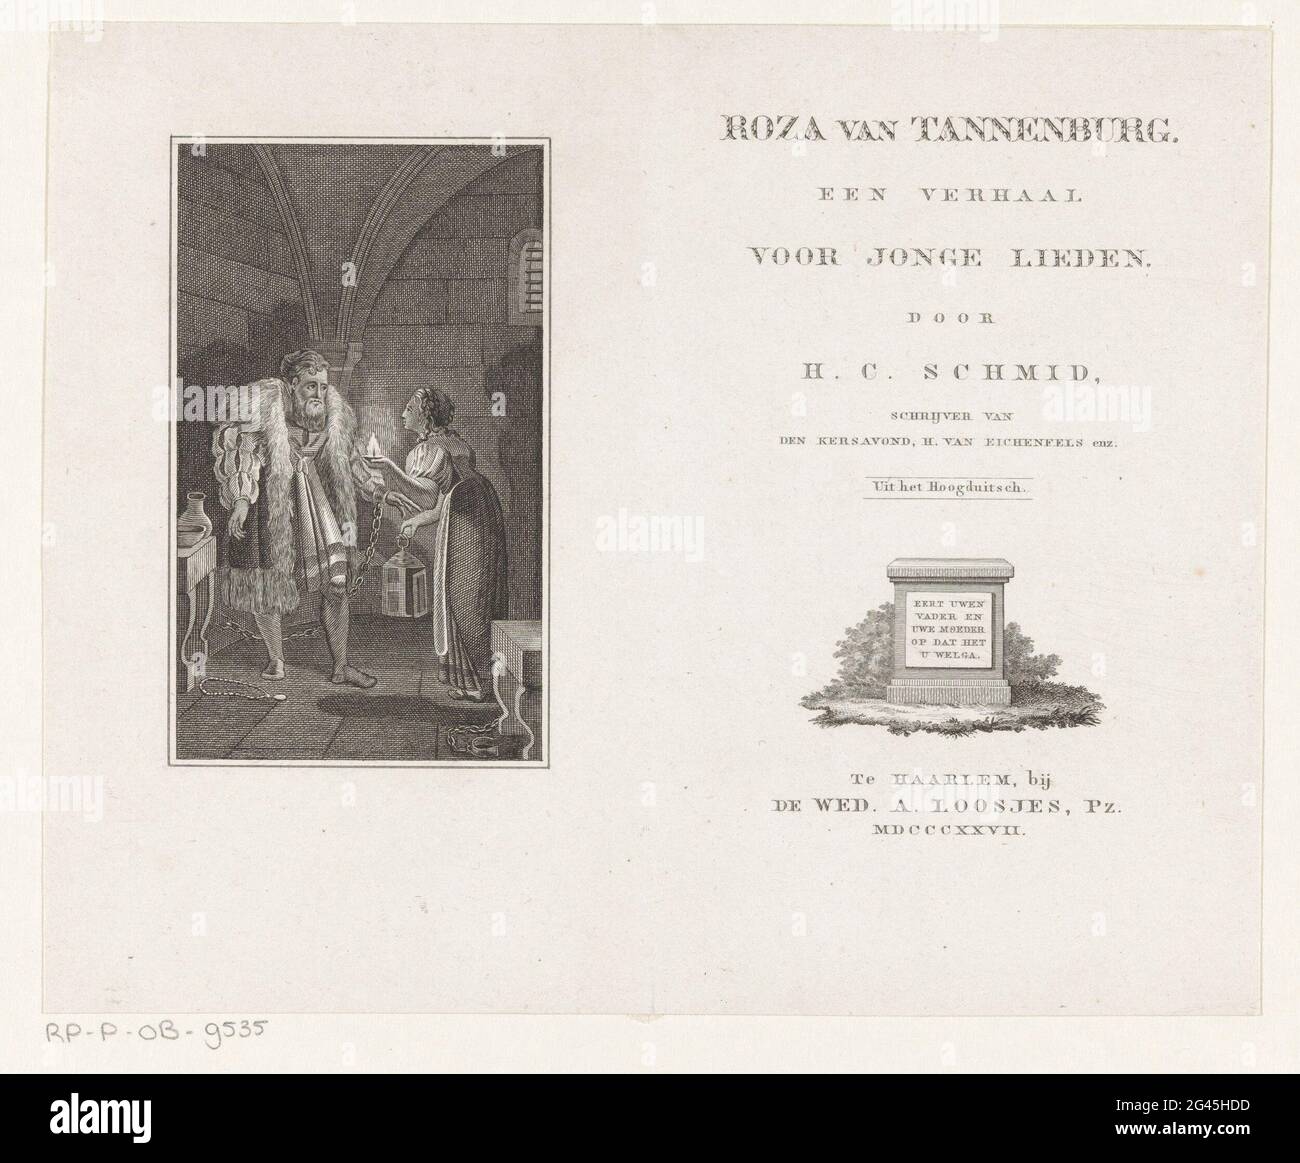 Knight and maid in prison; Title page for: H.C. Schmid, Roza from Tannenburg. A story for young people, 1827. In a prison, maid Roza stands with a lit candle in her hand opposite her father, Knight Edelbert. The man is chained. On the right an image of an altar. Stock Photo